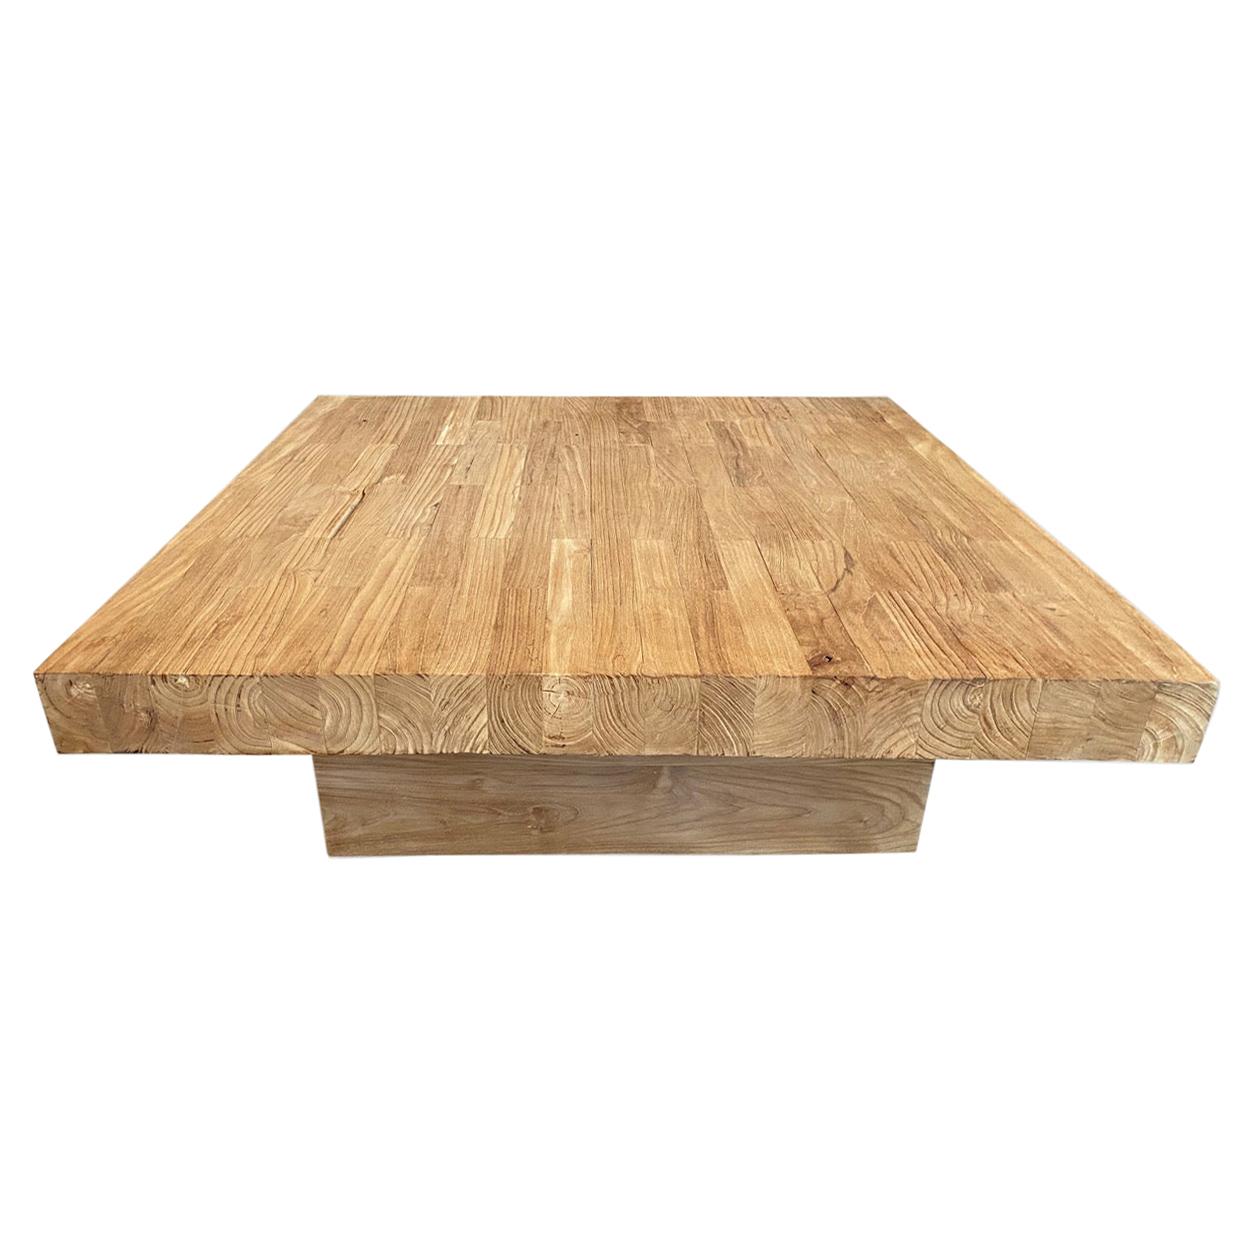 Andrianna Shamaris Reclaimed Square Natural Teak Wood Coffee Table For Sale